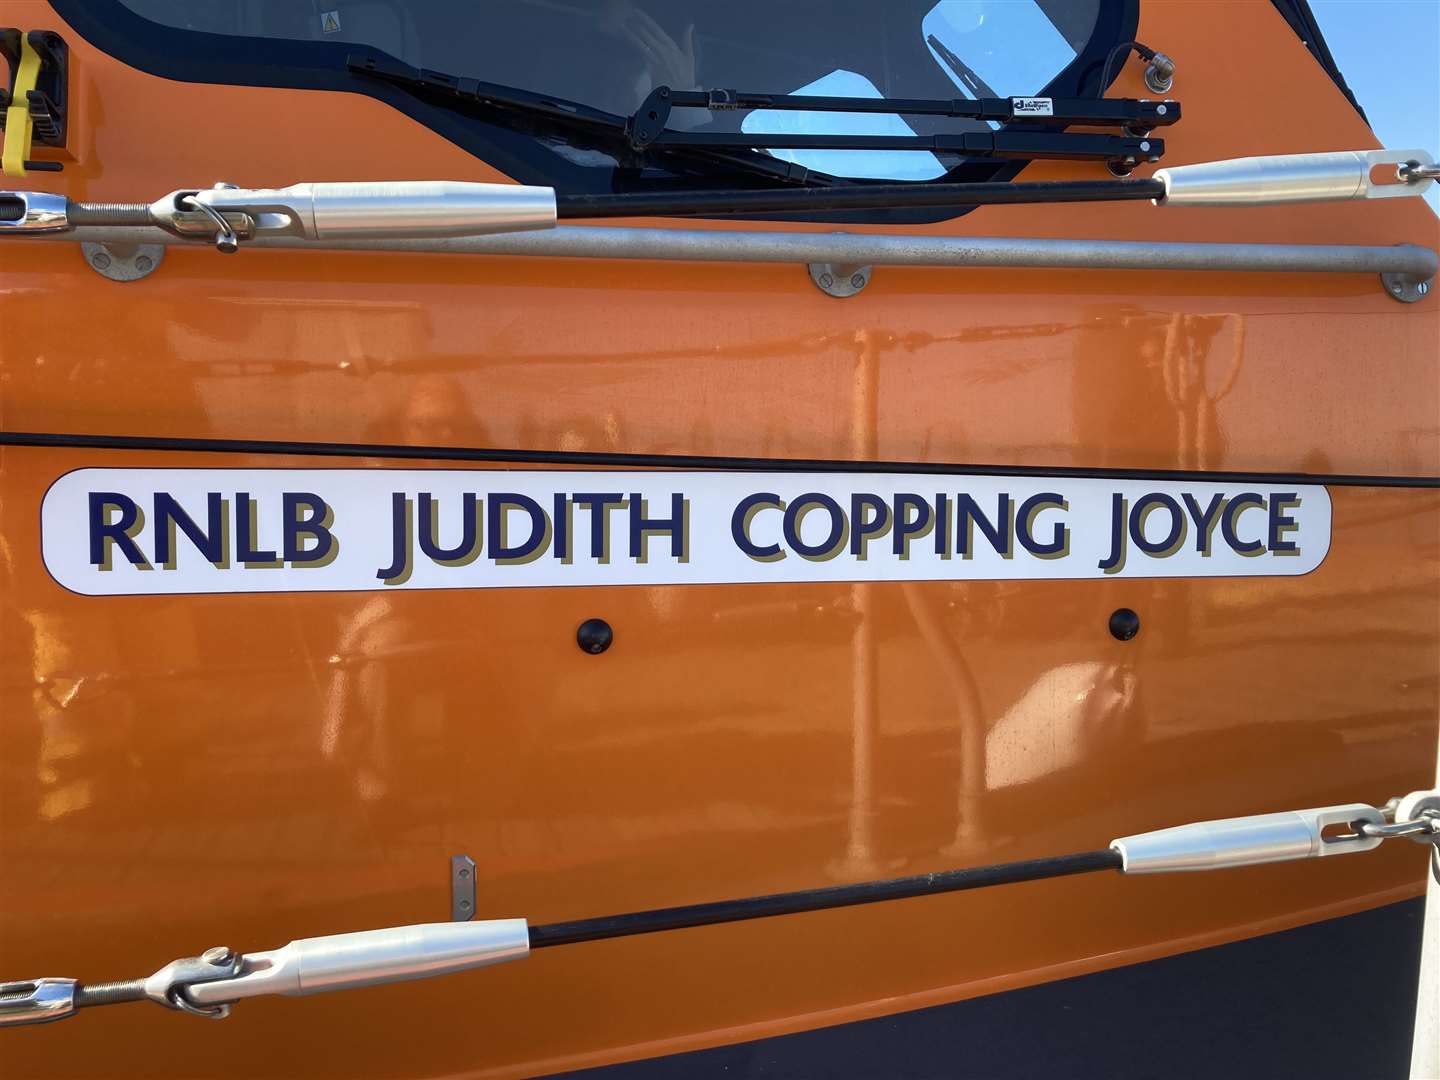 Sheppey's new RNLI lifeboat the Judith Copping Joyce